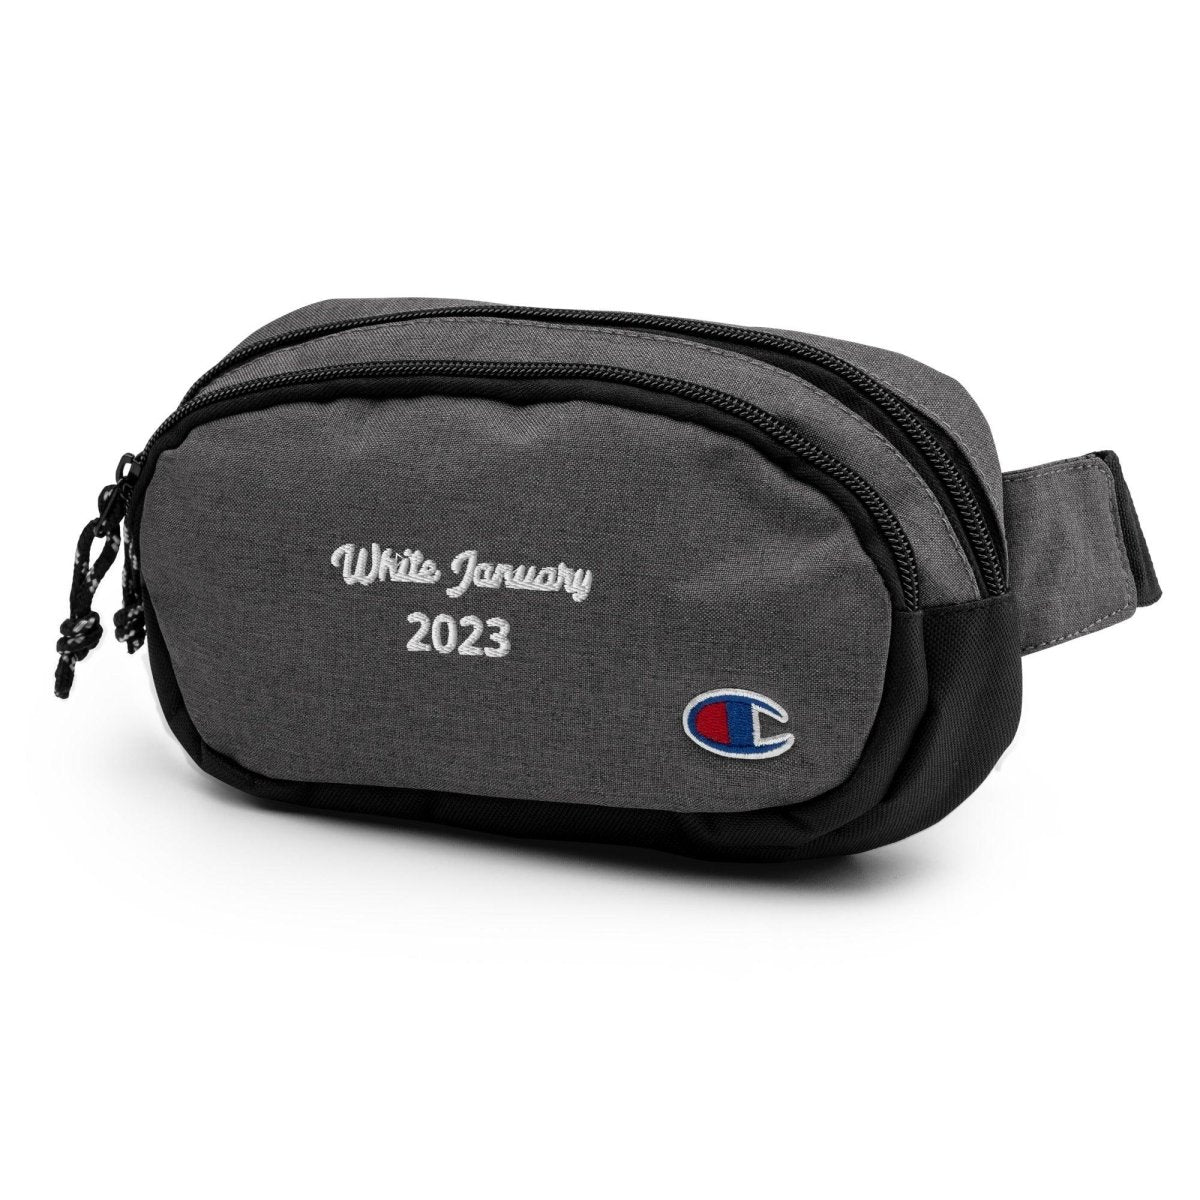 Champion fanny pack - Clean & Sober